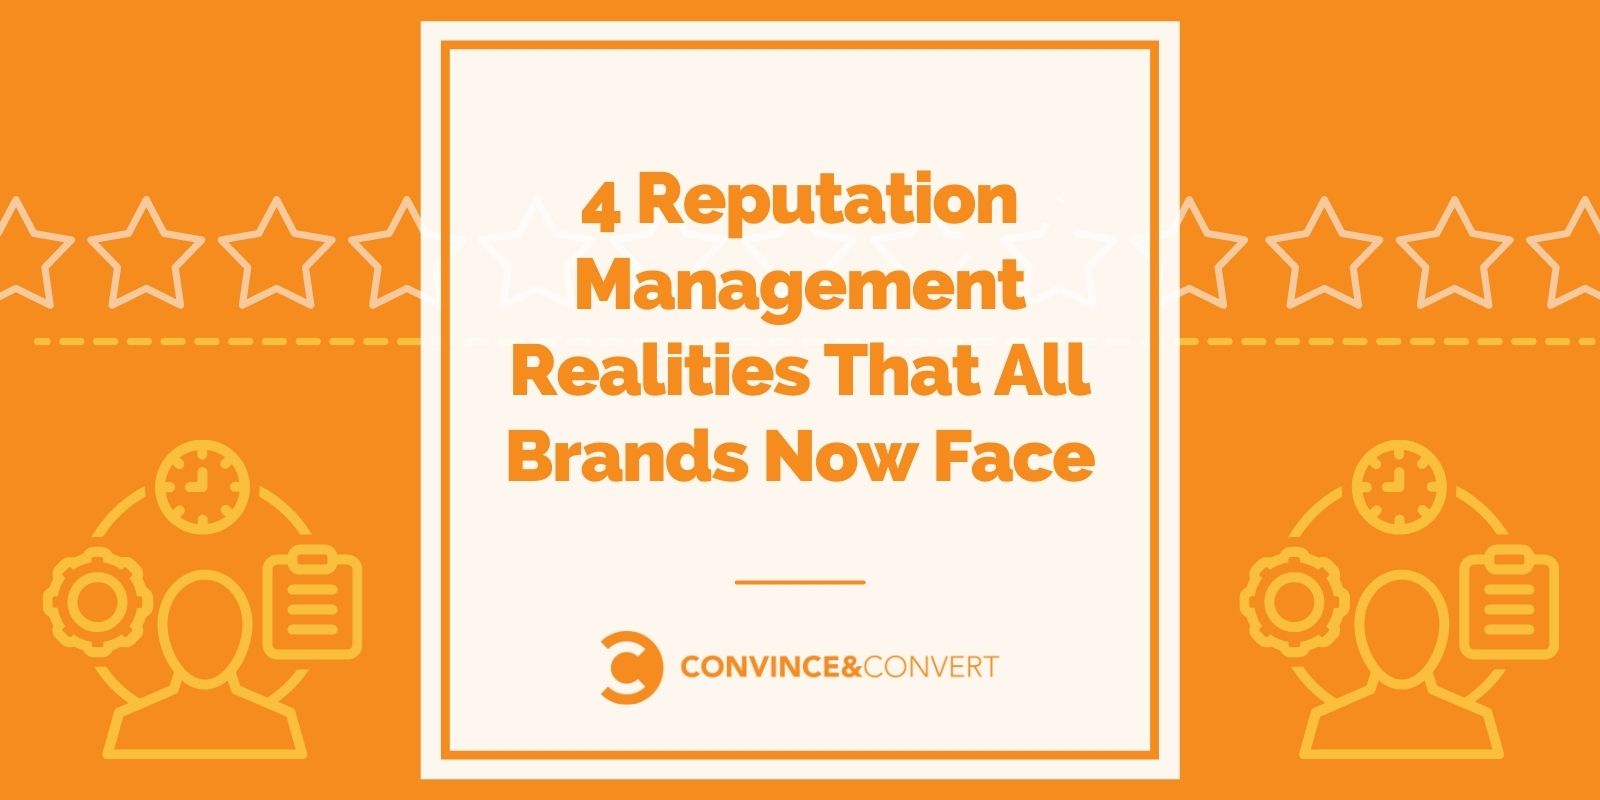 4 Reputation Management Realities That All Brands Now Face